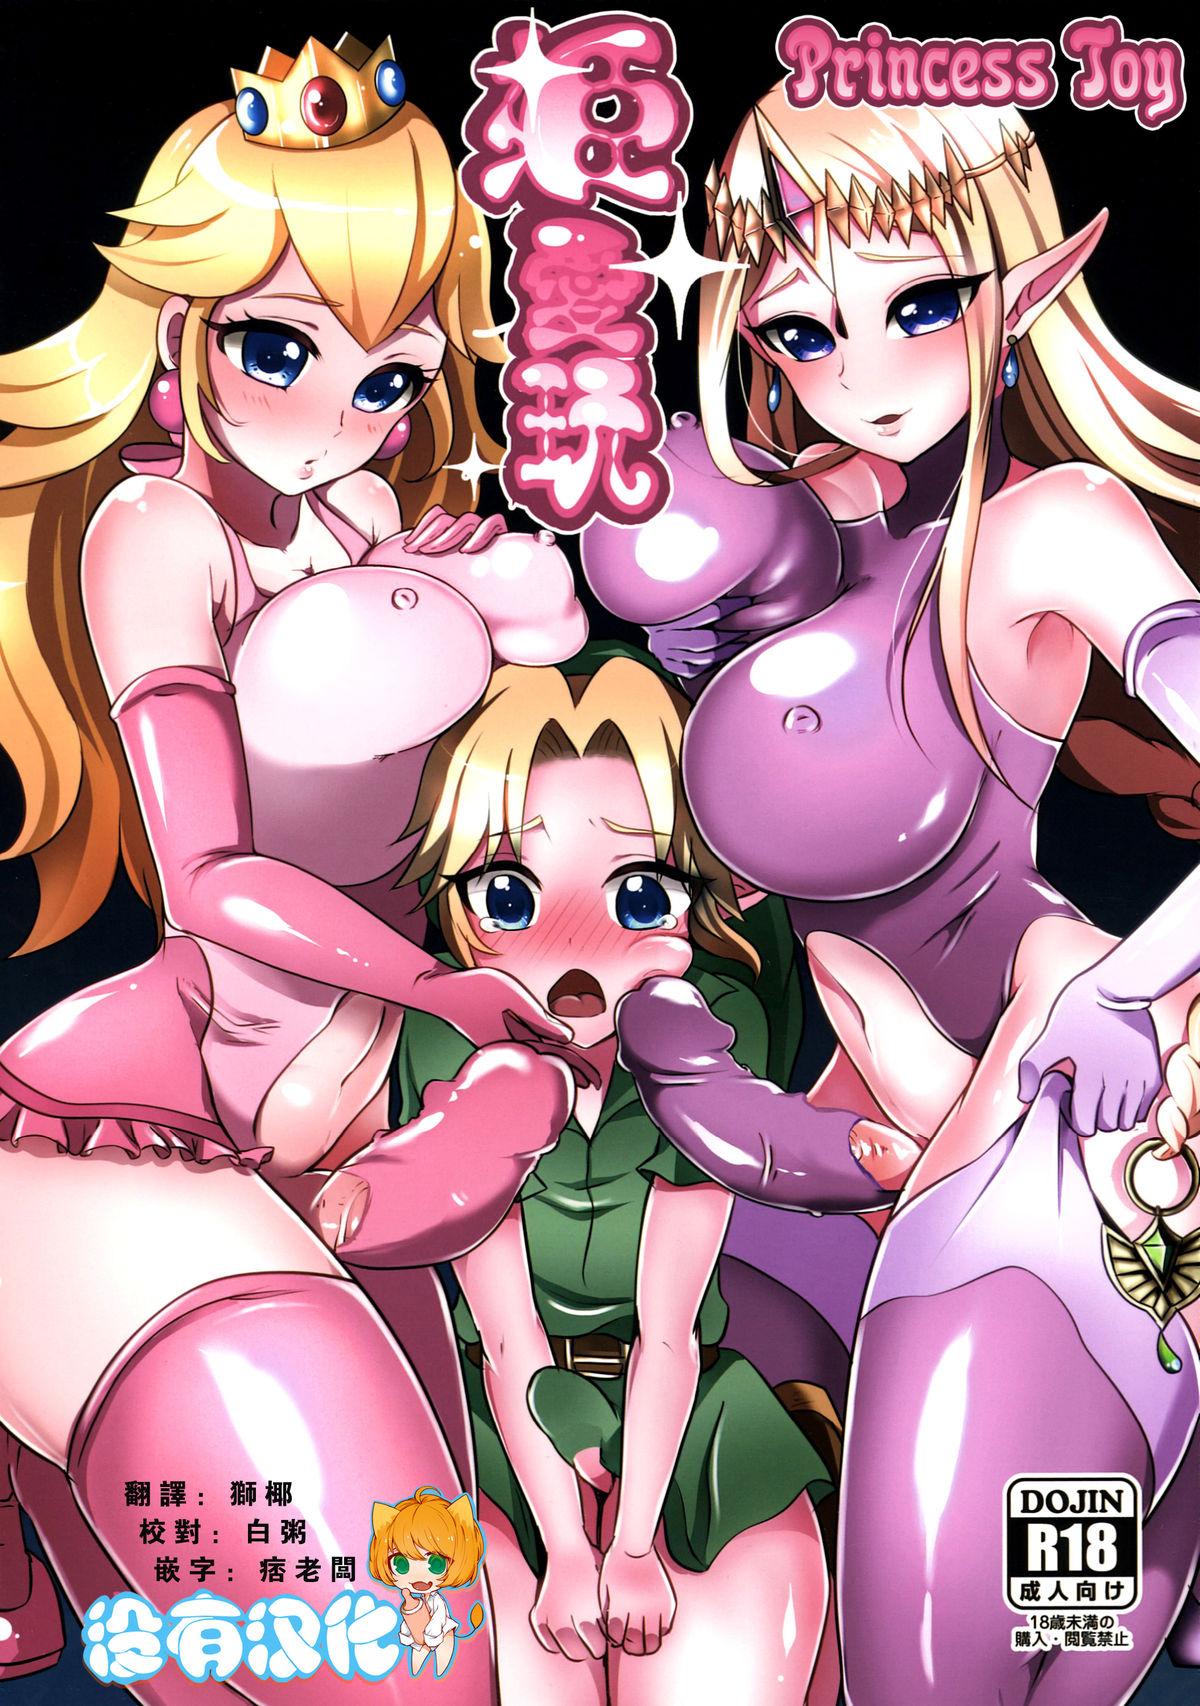 Groupfuck Hime Aigan - The legend of zelda Super mario brothers Milfporn - Page 1